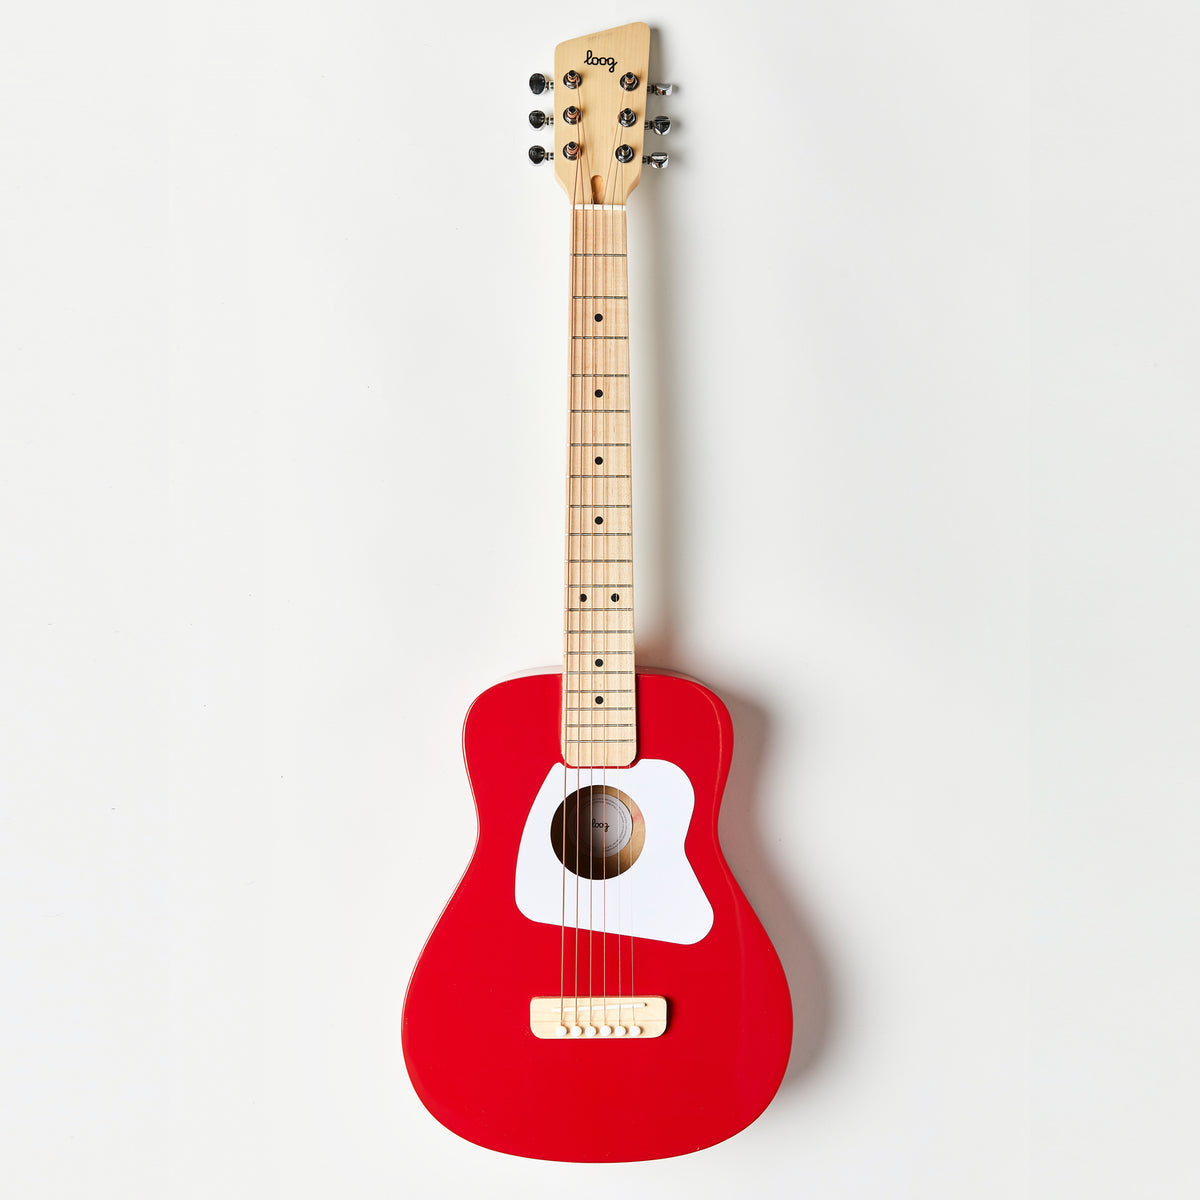 red-guitar-strap-gig-bag red-guitar-strap-wall-hanger red-guitar-strap-stand